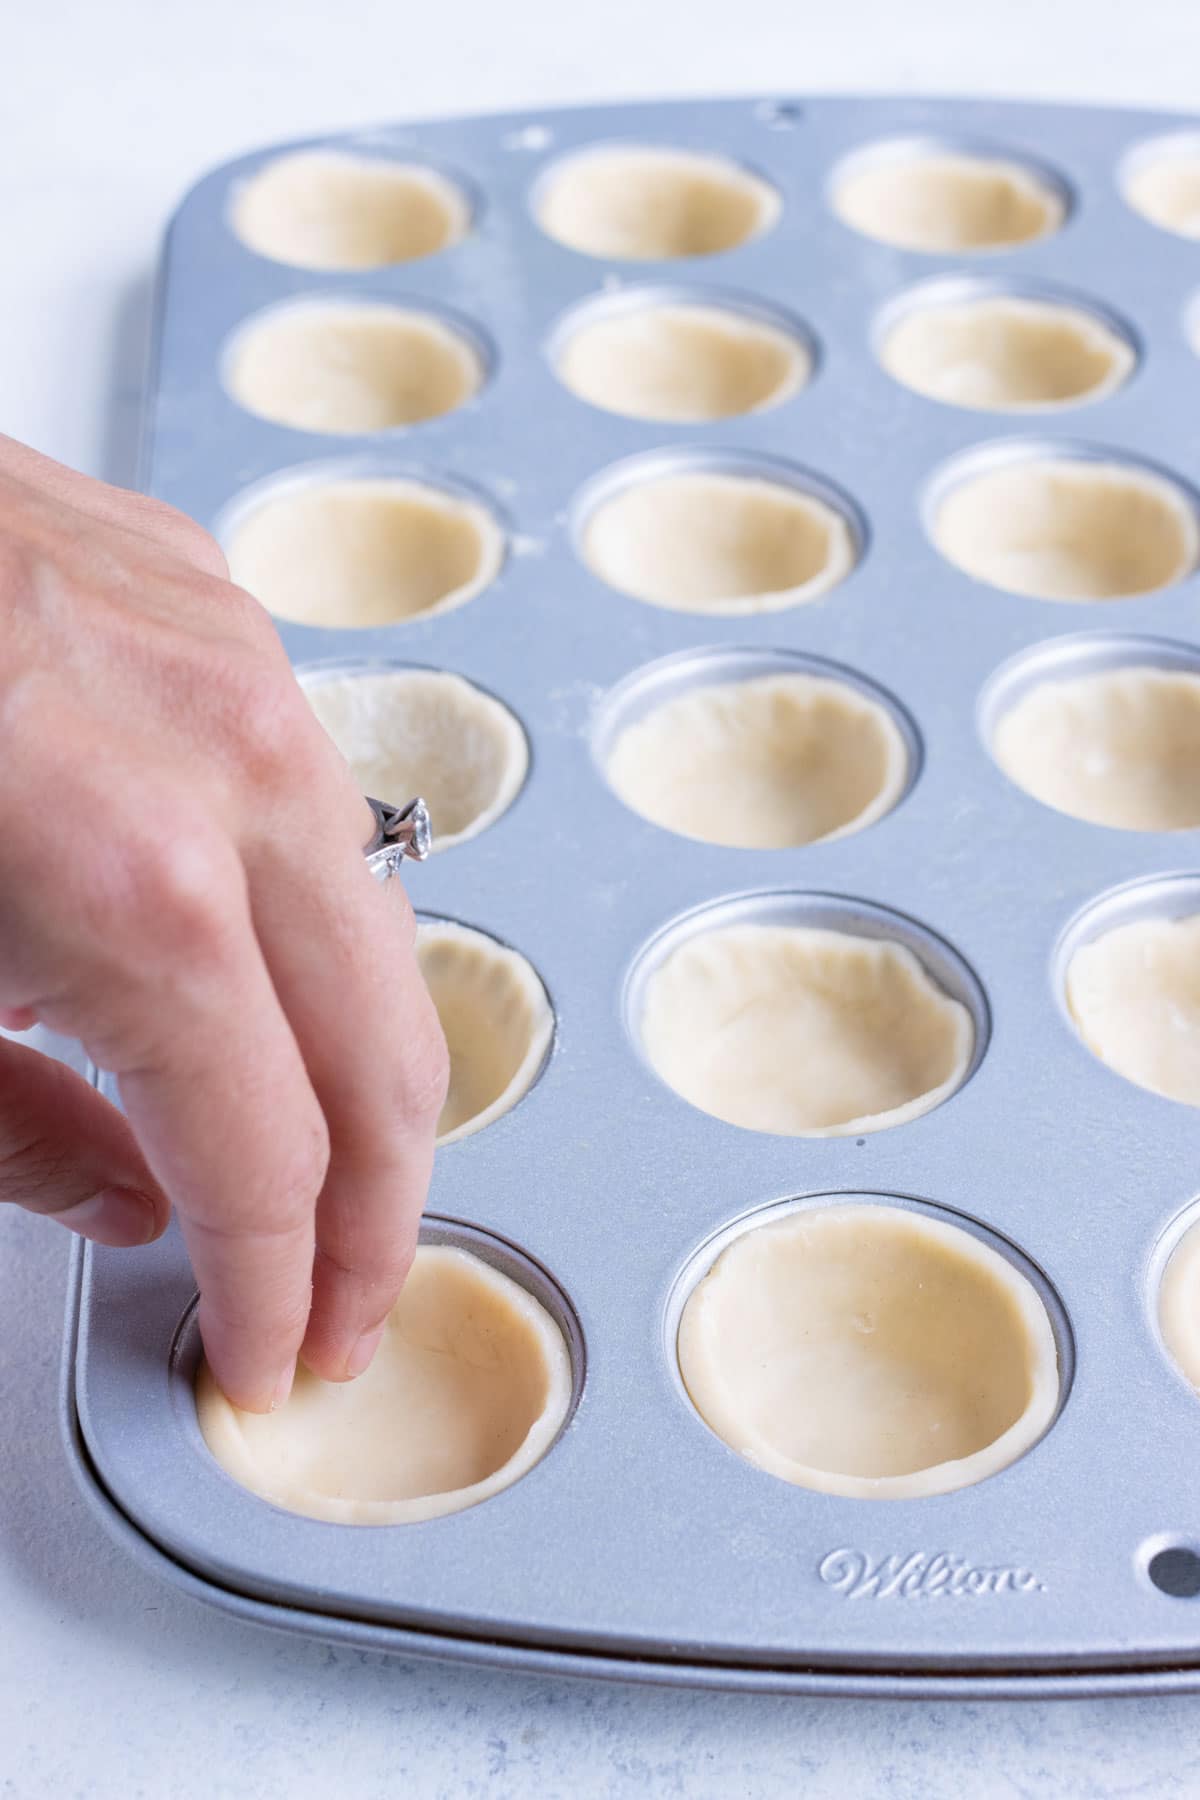 Pie crust is pressed into a mini muffin pan.